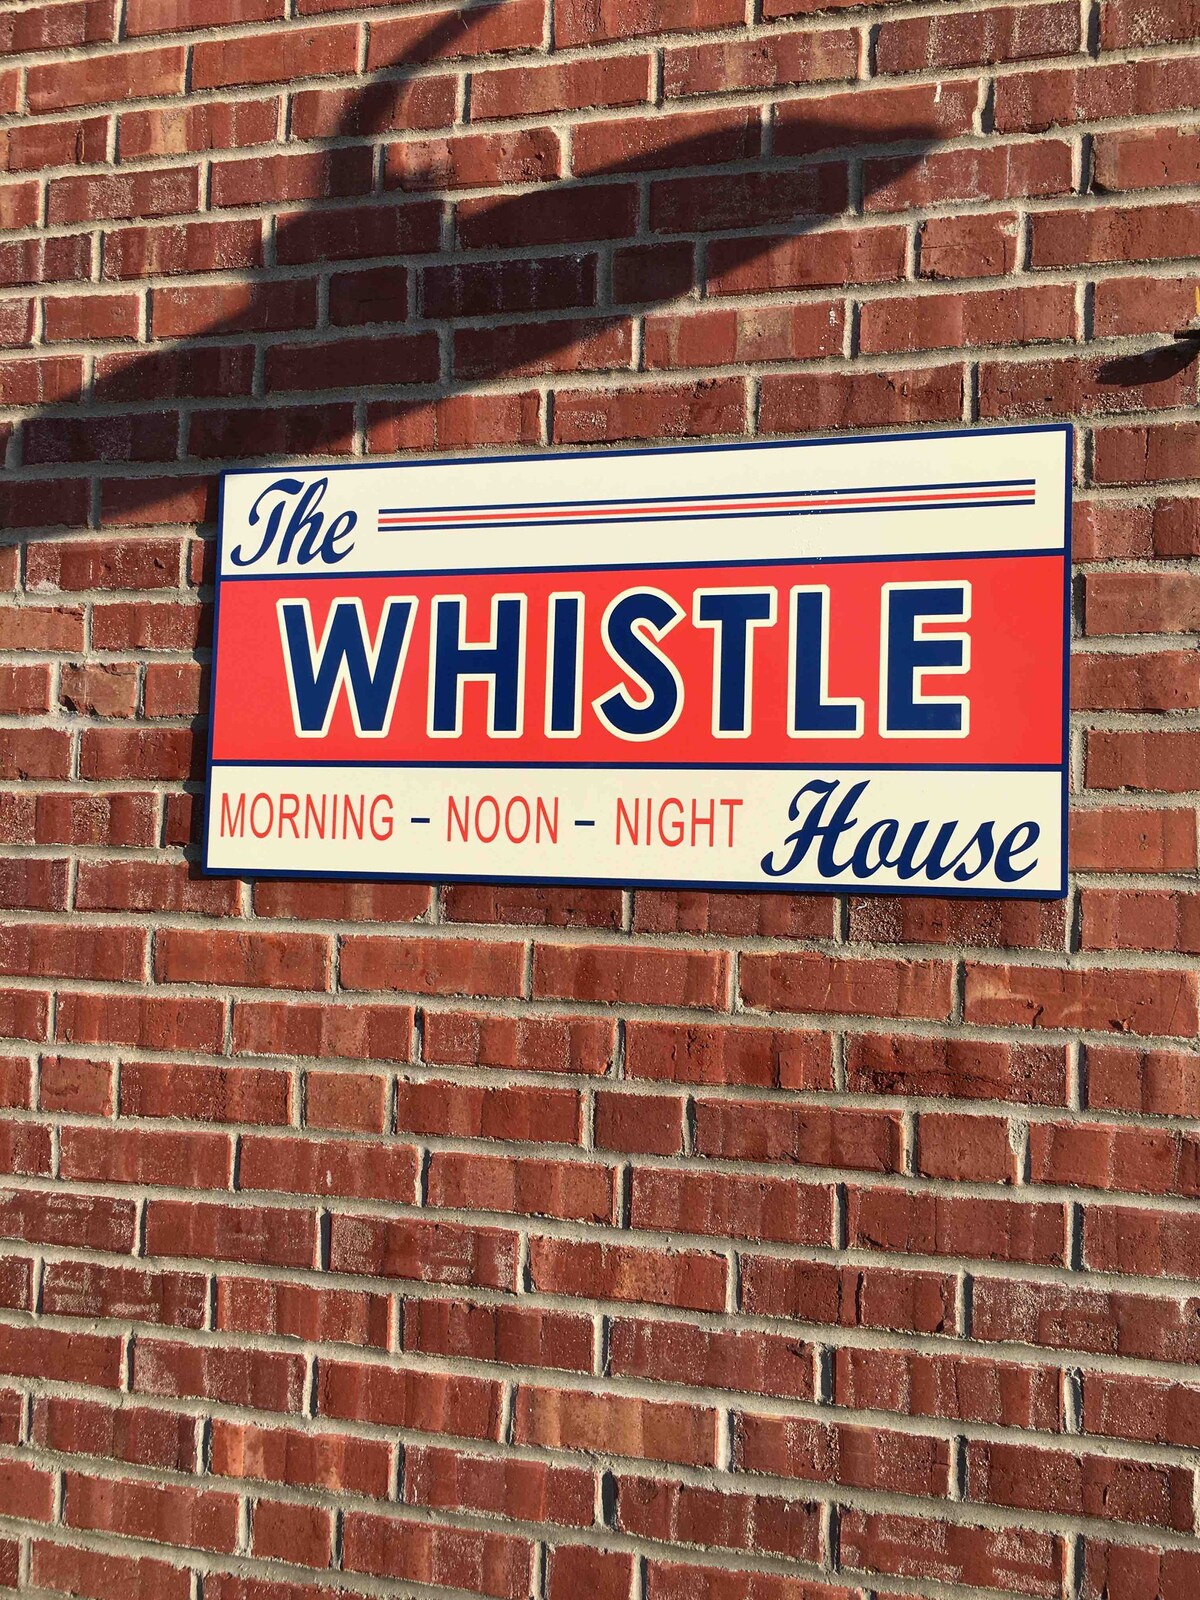 The Whistle House